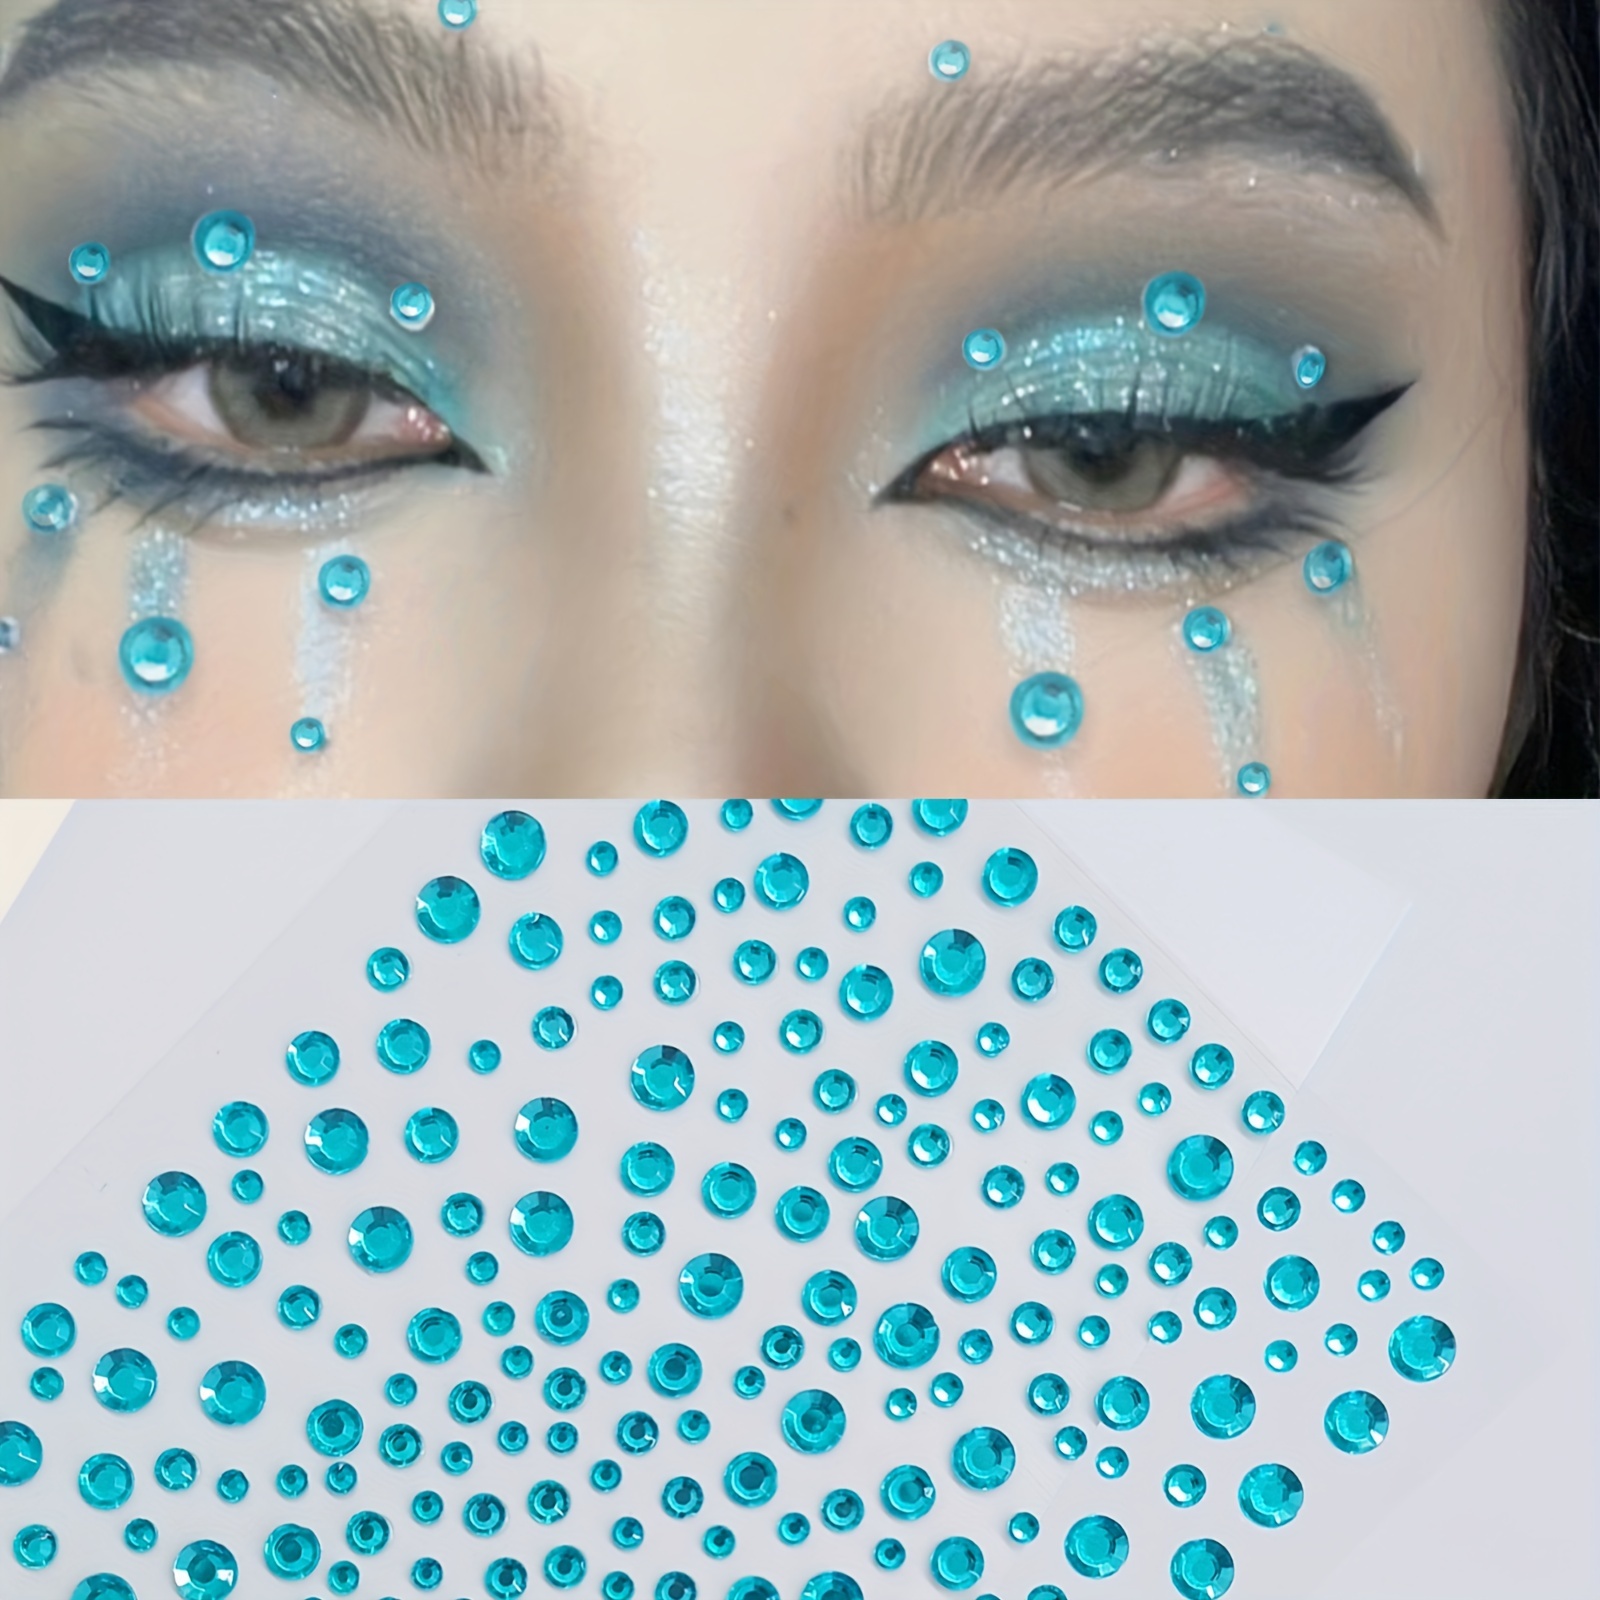 【Buy 1 Get 1 Free】2 pcs Y2K Style Rhinestone Eye and Face Drill Stickers  for Music Festivals, Proms, and Mardi Gras Makeup